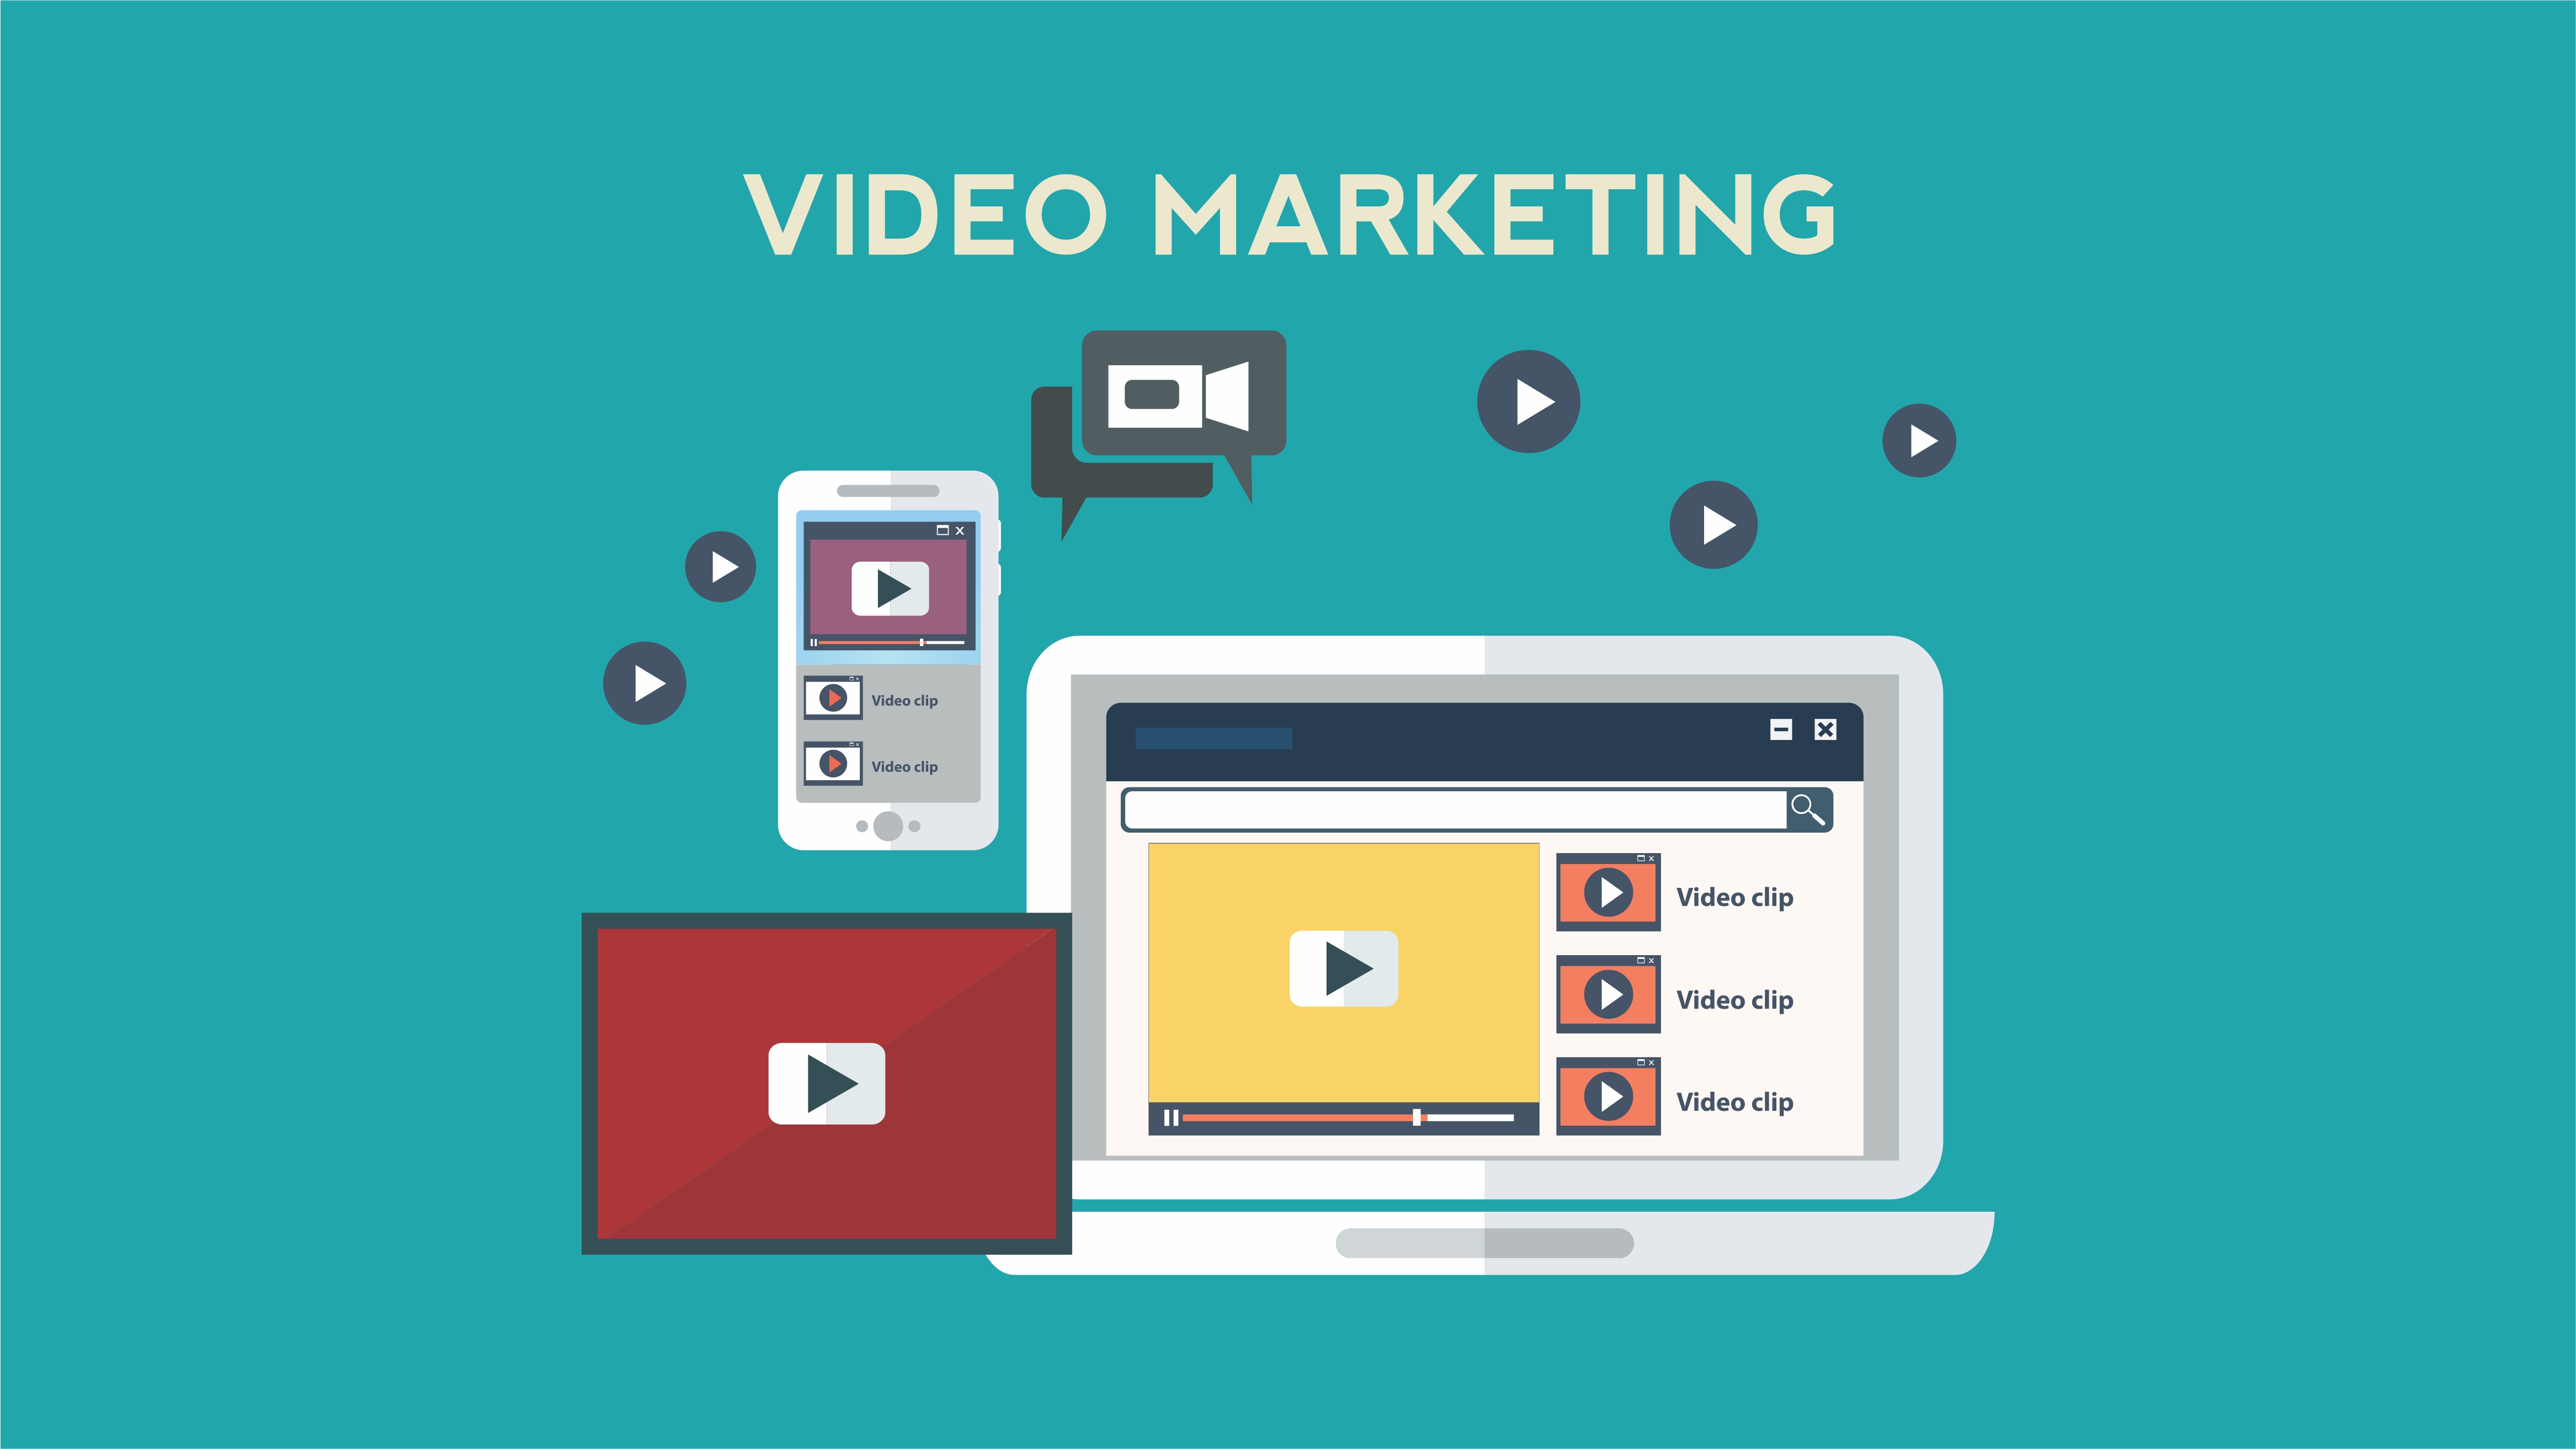 Guide to video marketing - social media scheduler